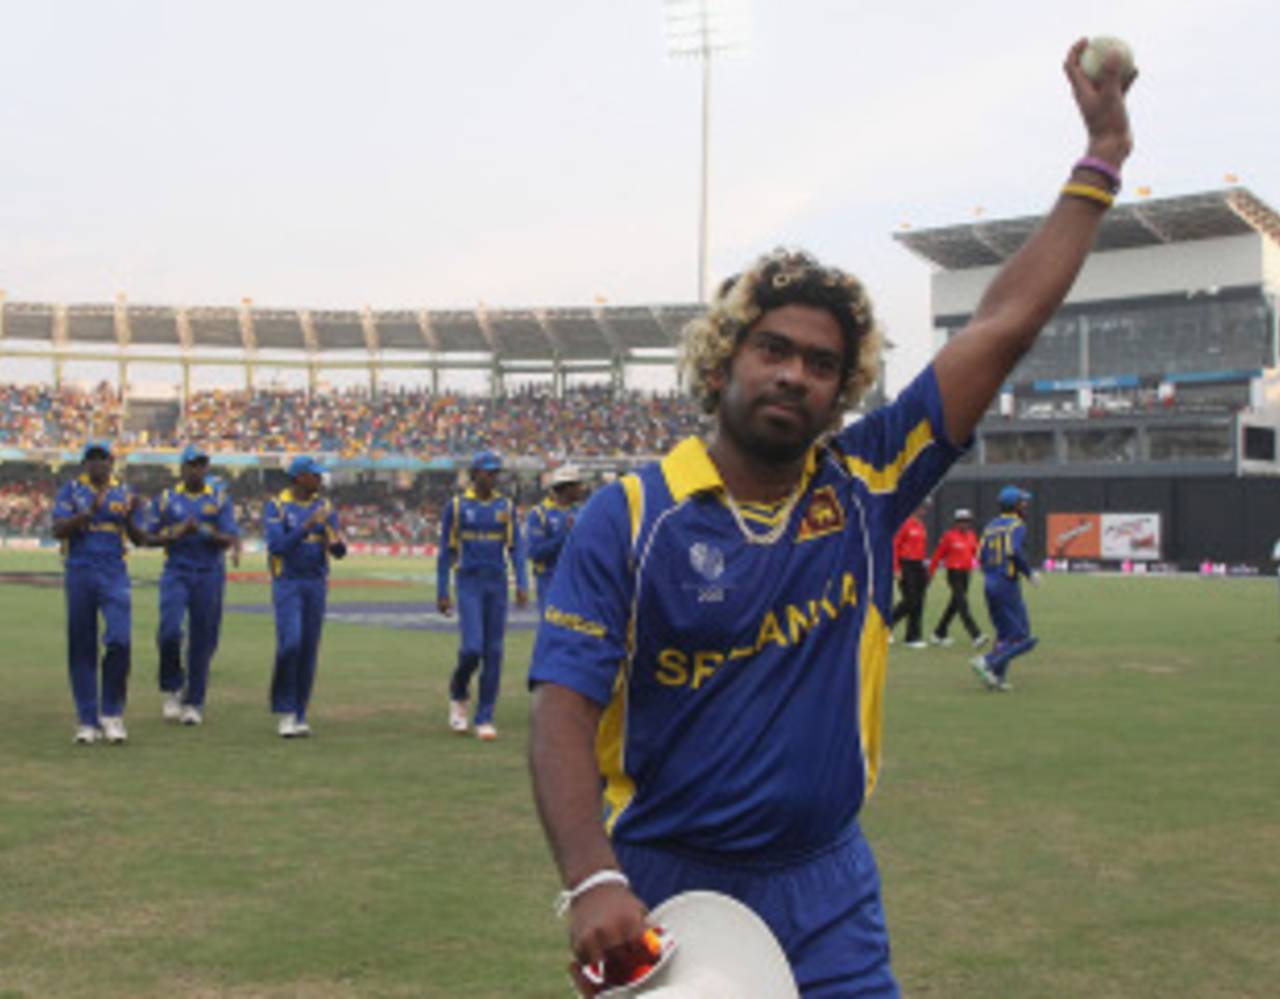 Lasith Malinga salutes the crowd after finishing with six wickets, Sri Lanka v Kenya, Group A, World Cup 2011, Colombo, March 1, 2011